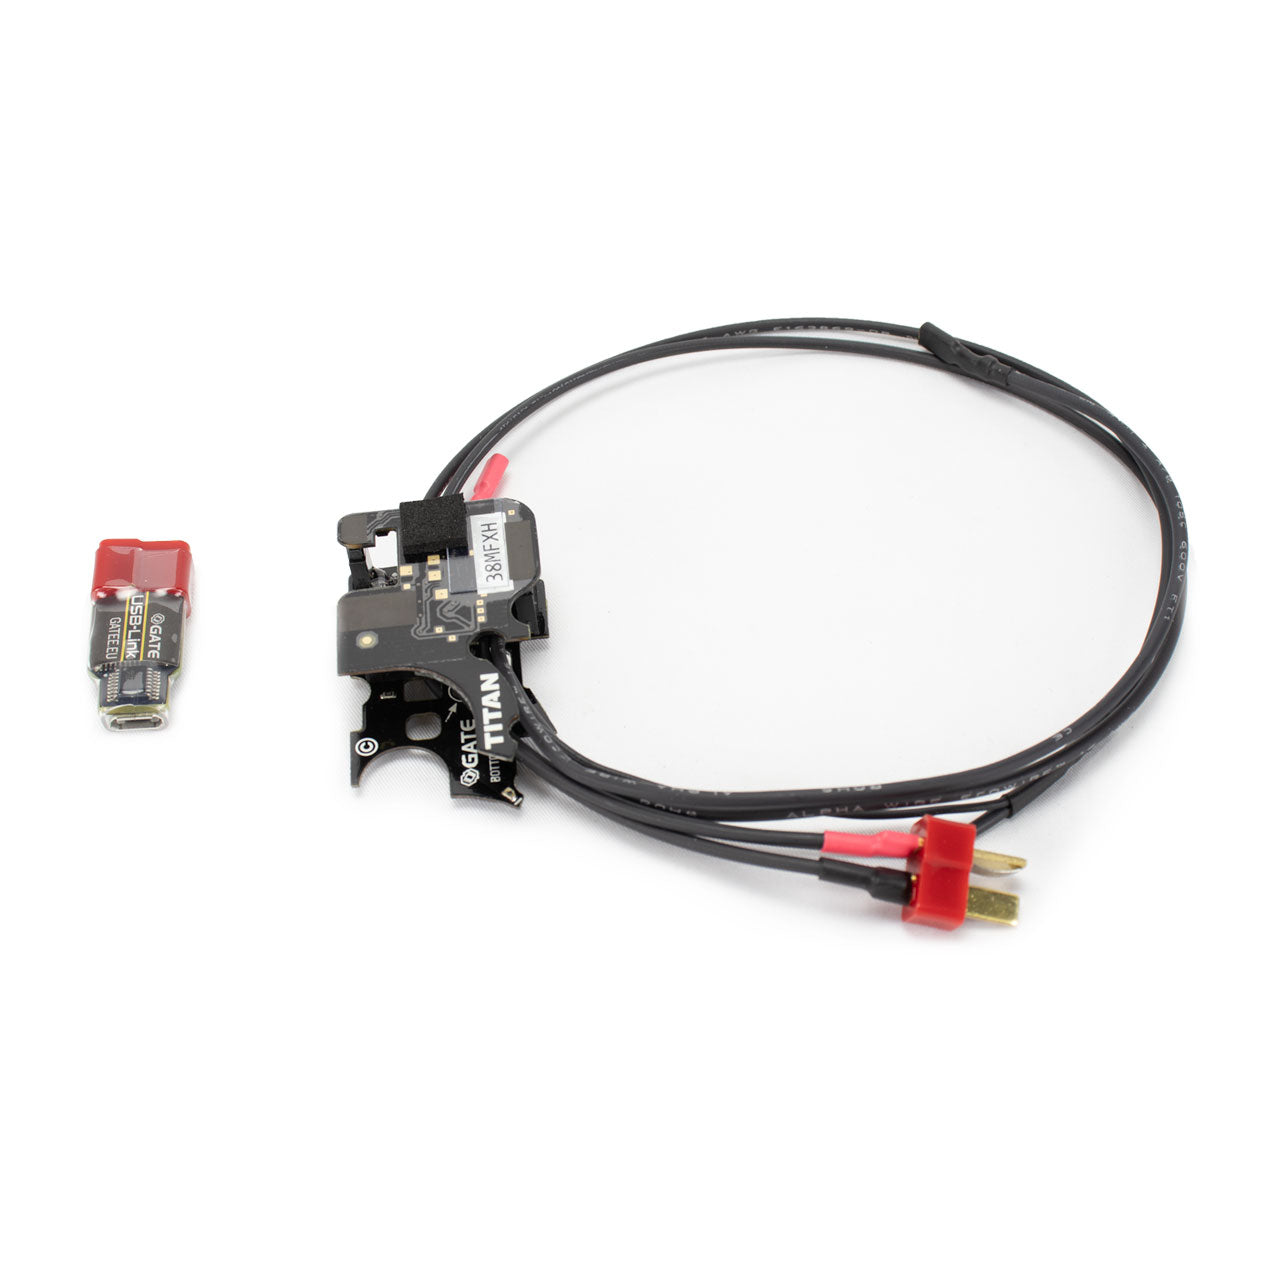 Gate TITAN Airsoft Advanced drop-in AEG MOSFET Complete Set with USB-Link - V2 Rear Wired / Without Programming Card)